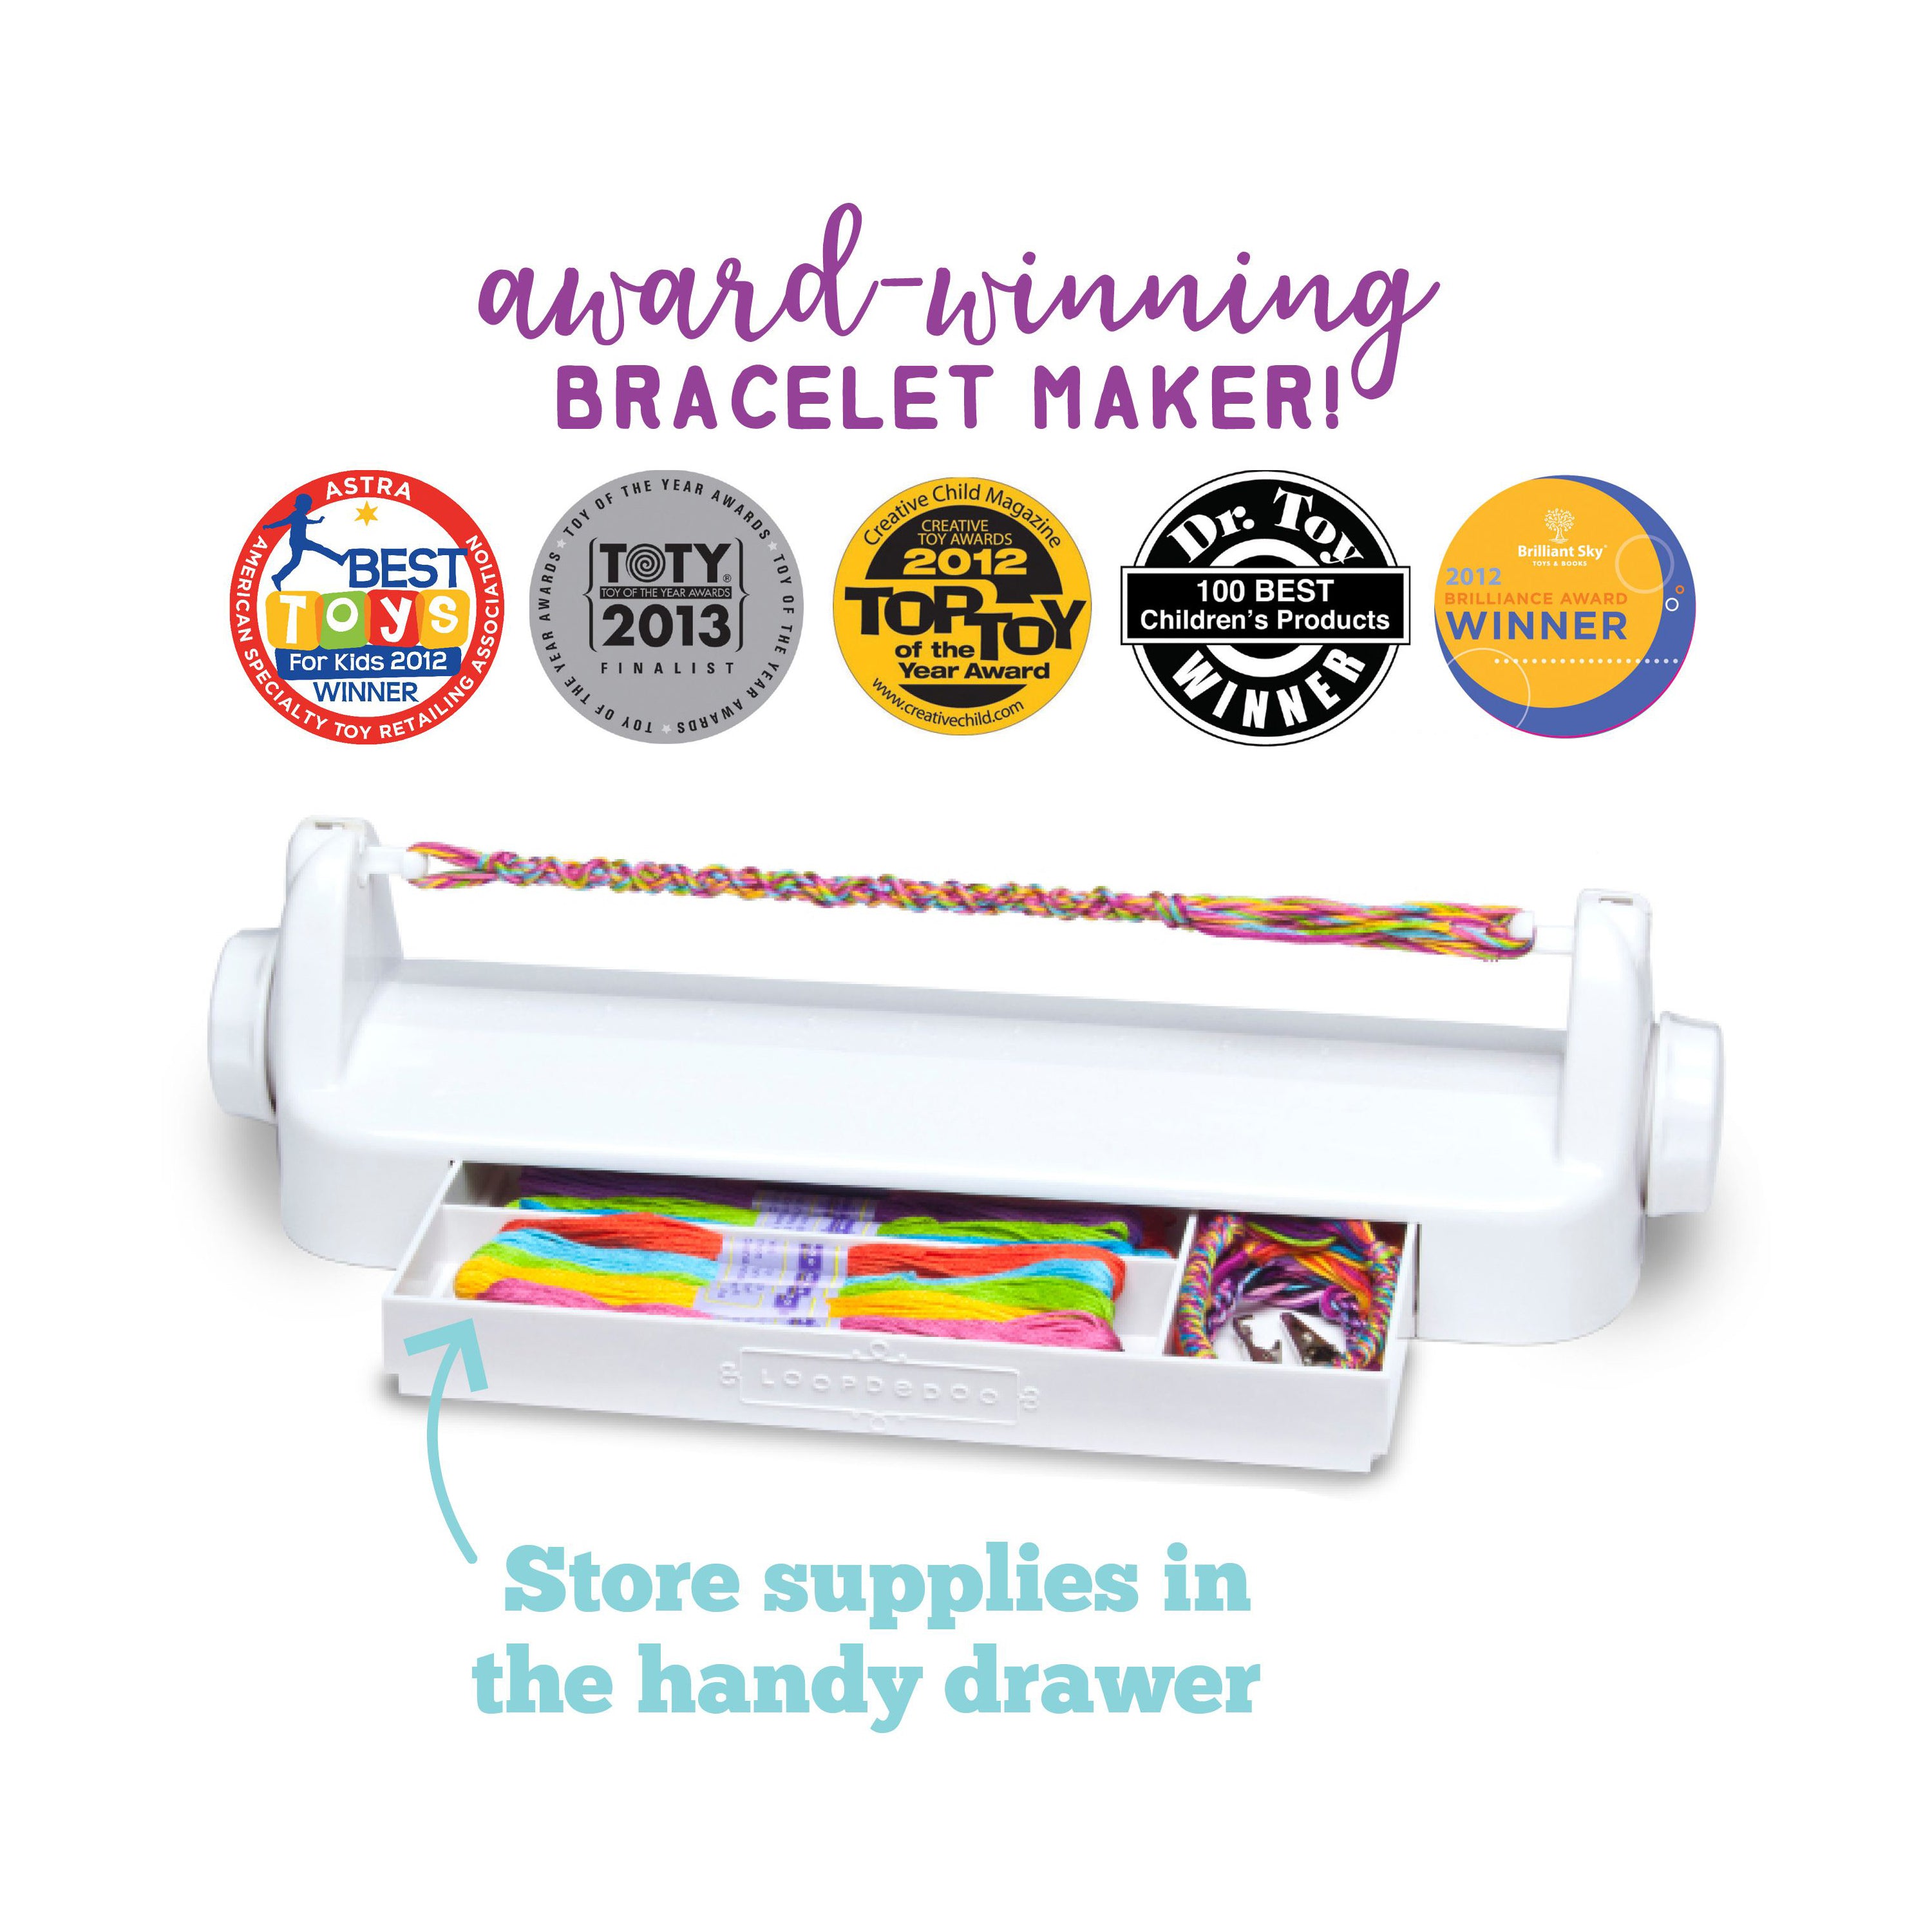 My Friendship Bracelet Maker Kit - Travel Ready with Attached Thread Case